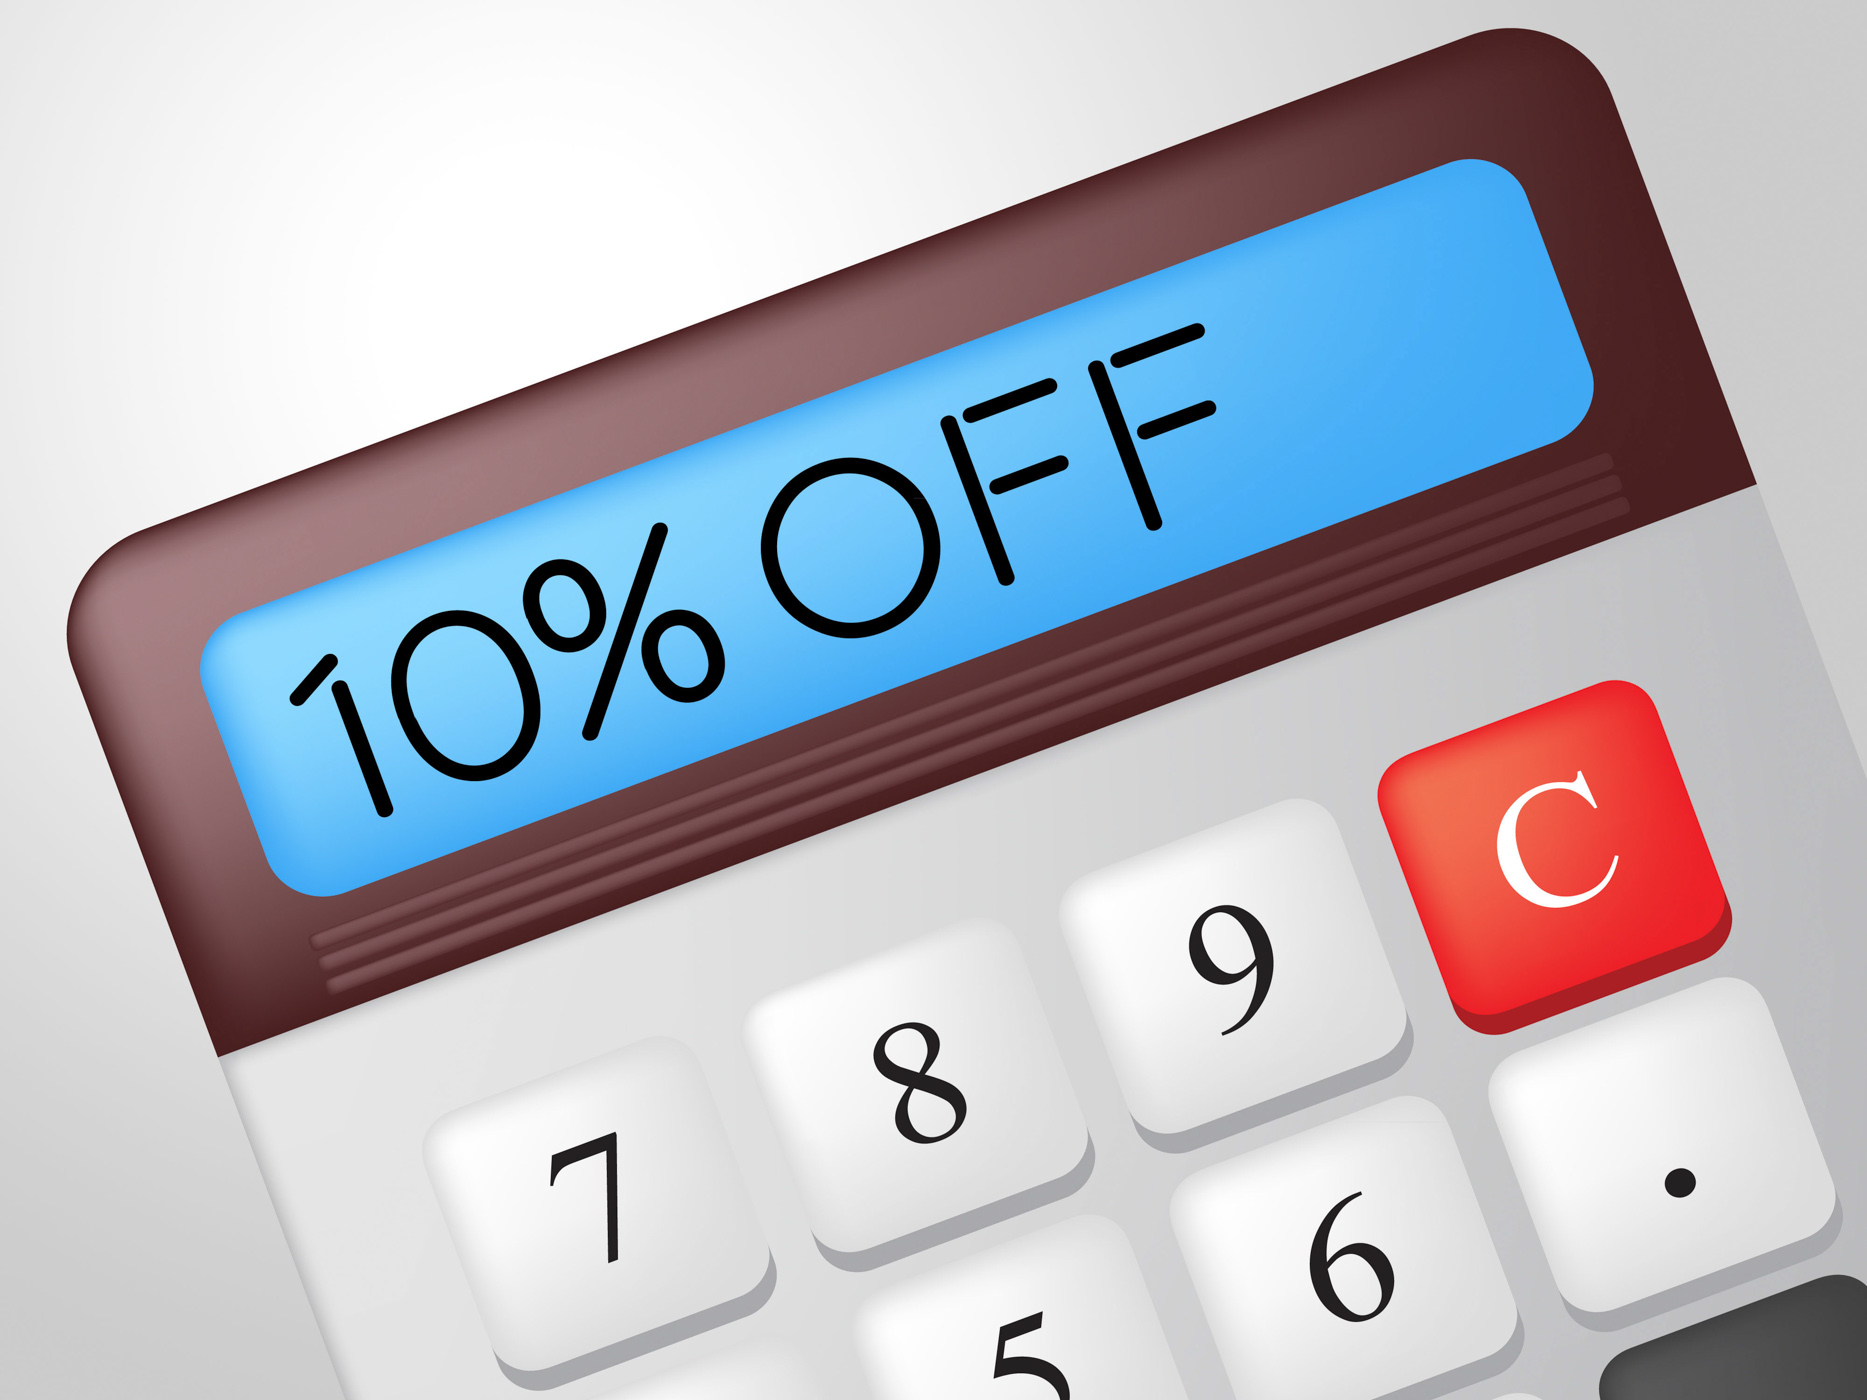 Ten percent off indicates calculate offer and sale photo